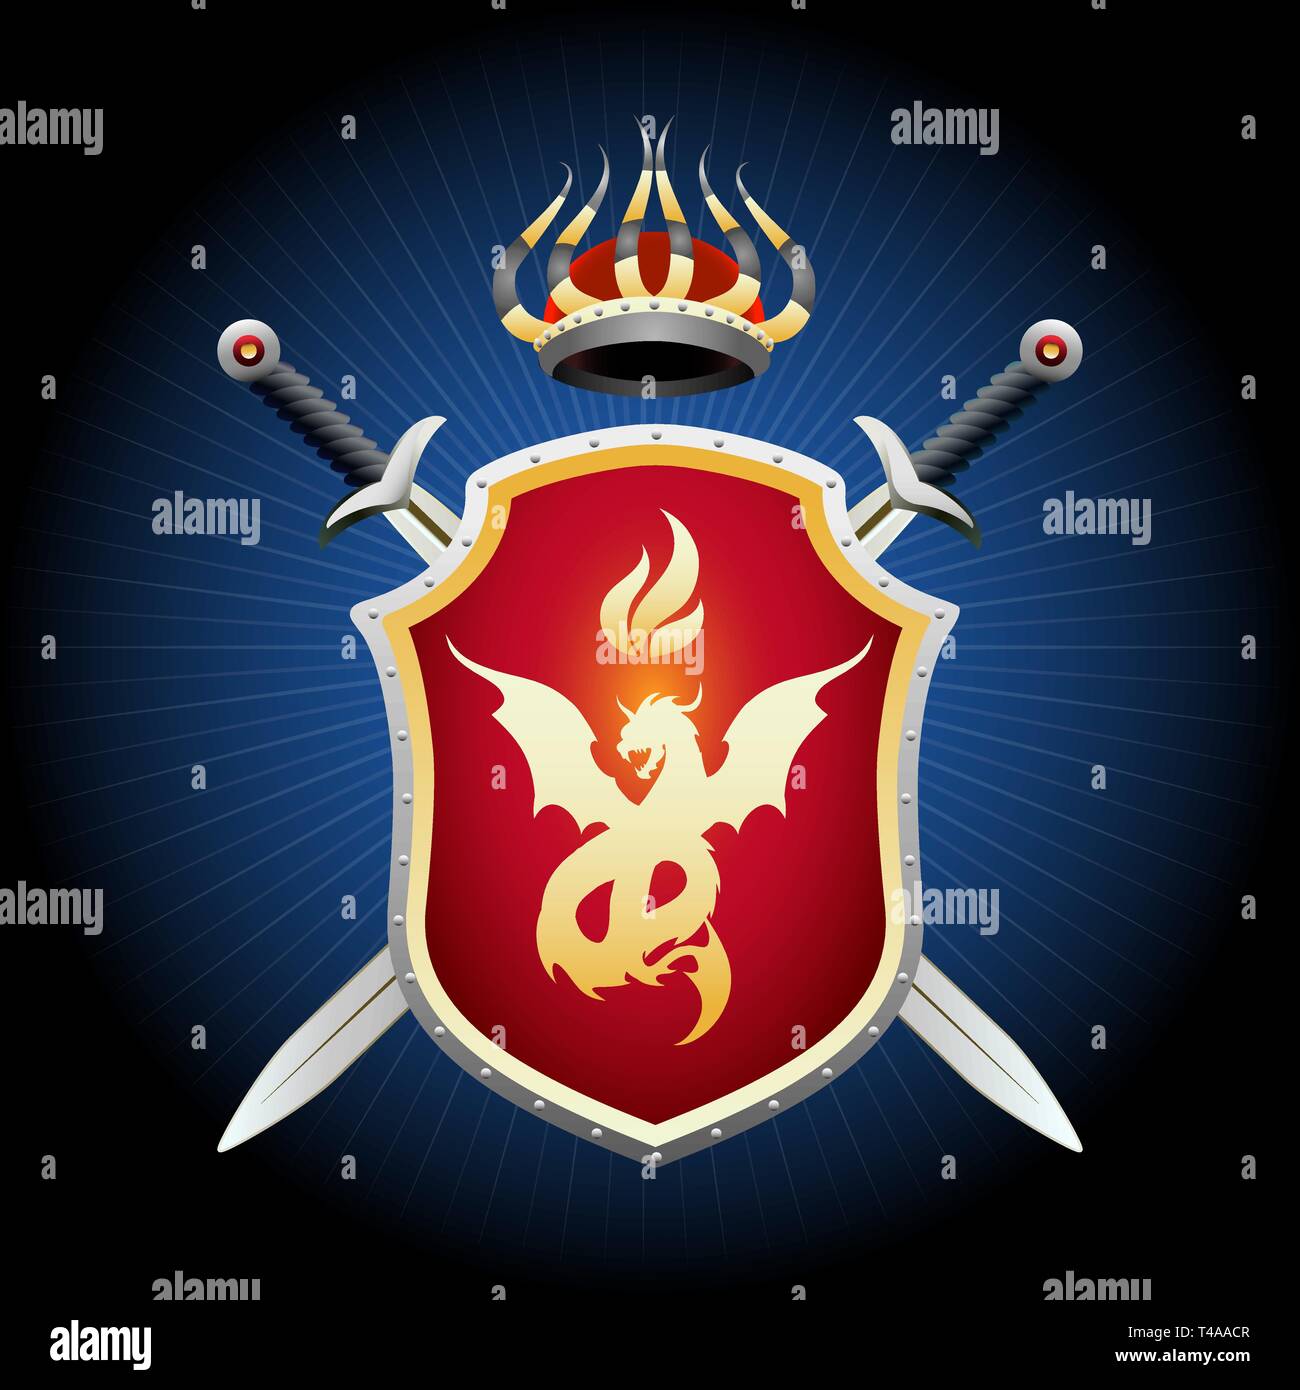 Coat of Arms with crown swords and shield. Golden shield with fiery dragon emblem. Vector illustration. Stock Vector